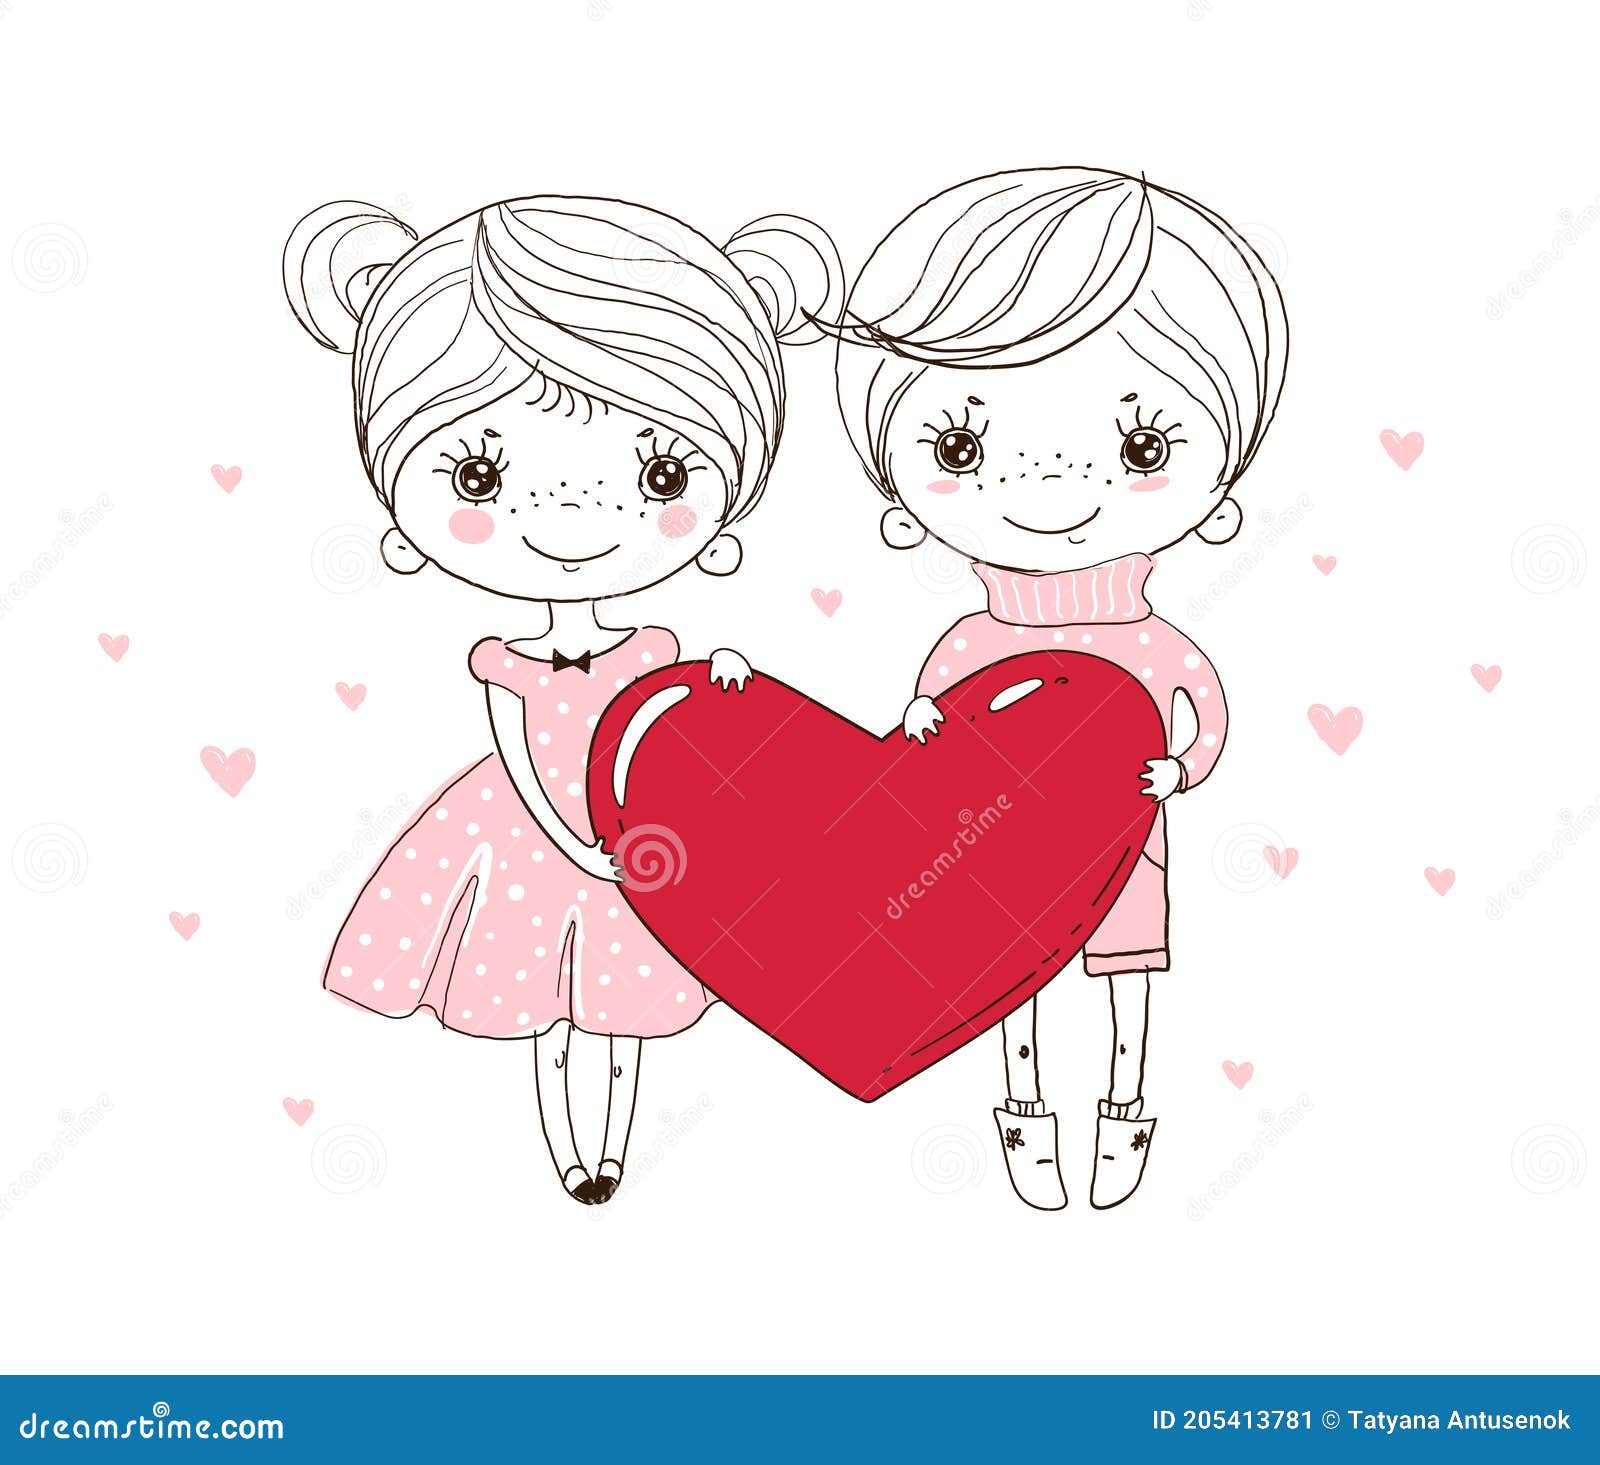 Cute Boy And Girl Are Holding A Big Red Heart Doodle Illustration For Wedding Valentine S Day Children S Card Sketch Stock Vector Illustration Of Line Drawing